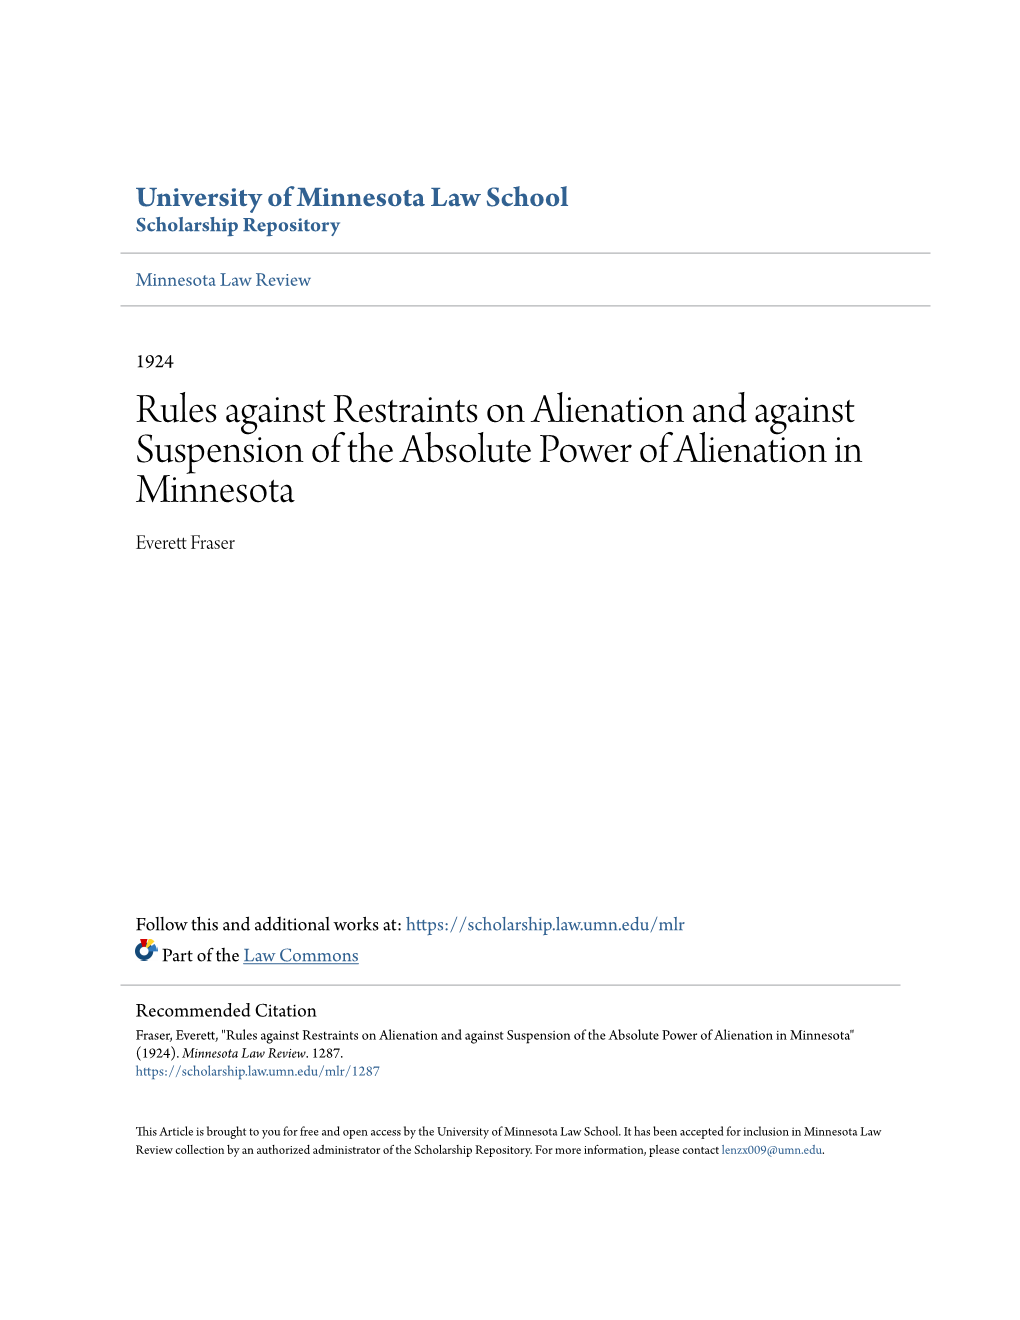 Rules Against Restraints on Alienation and Against Suspension of the Absolute Power of Alienation in Minnesota Everett Rf Aser